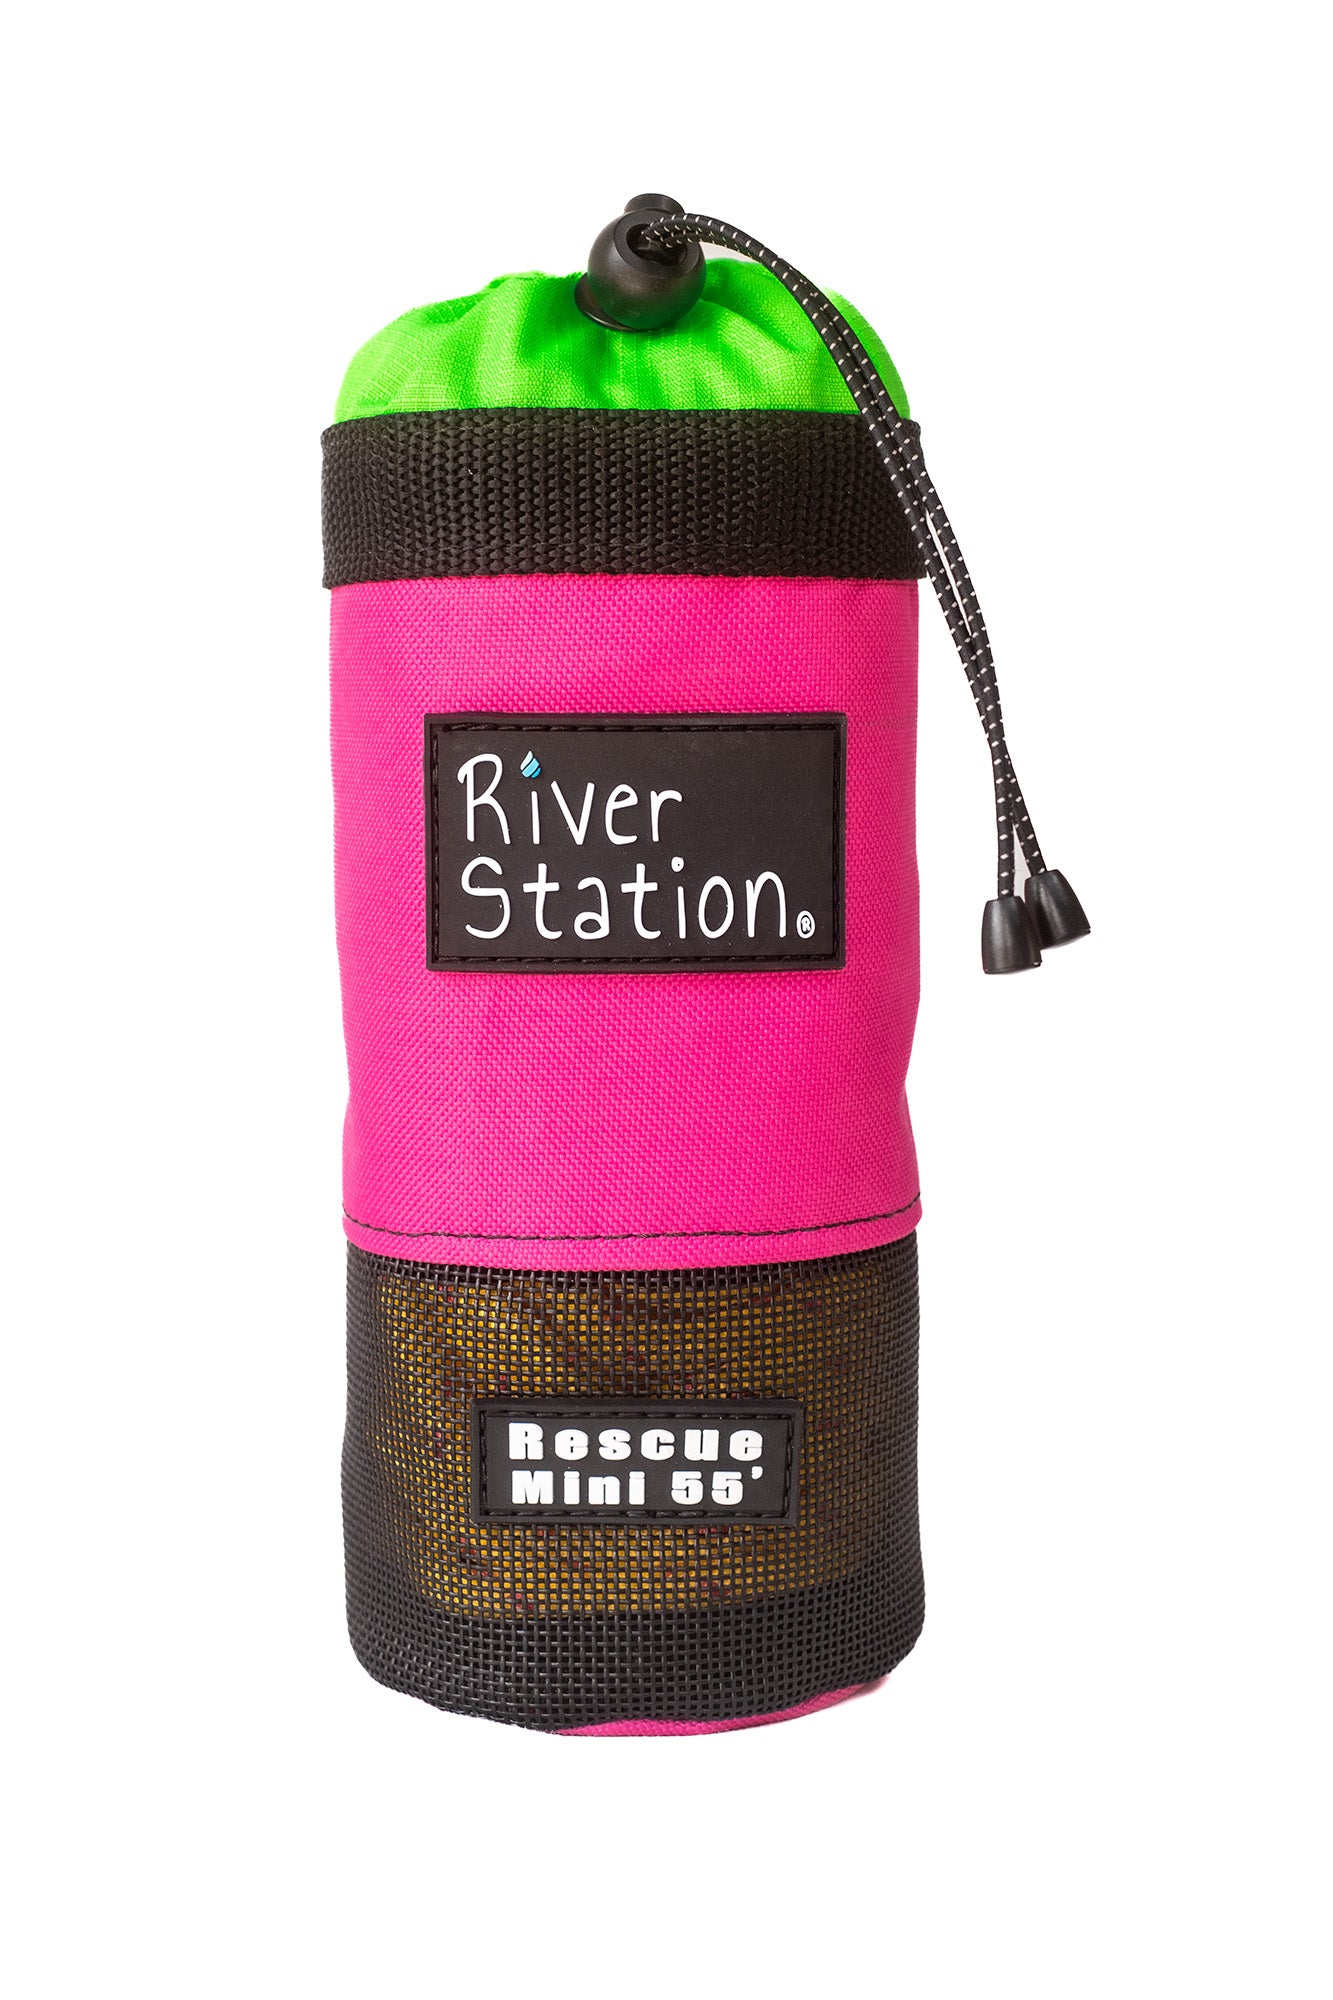 Best throw bag for whitewater rafting